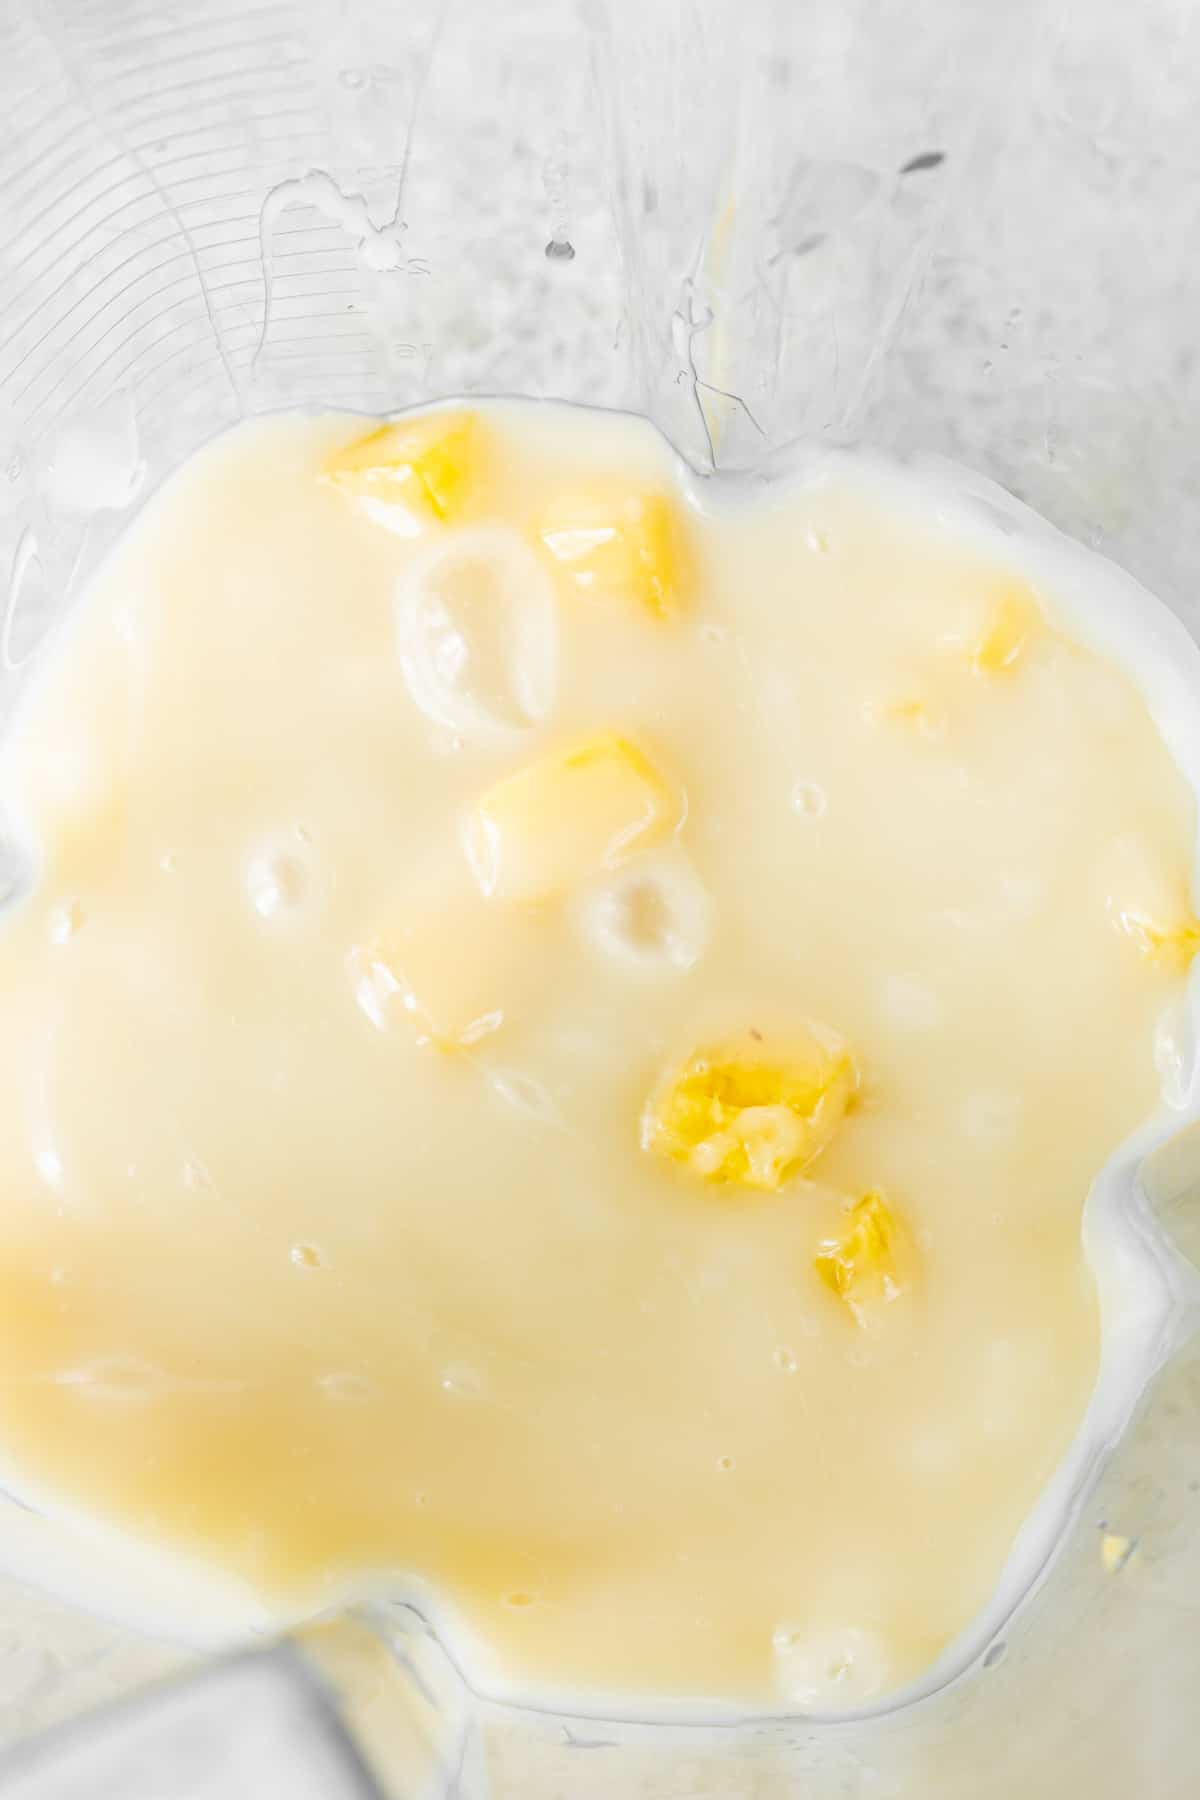 Pineapple and sweetened condensed milk in a blender for a pina colada dipping sauce